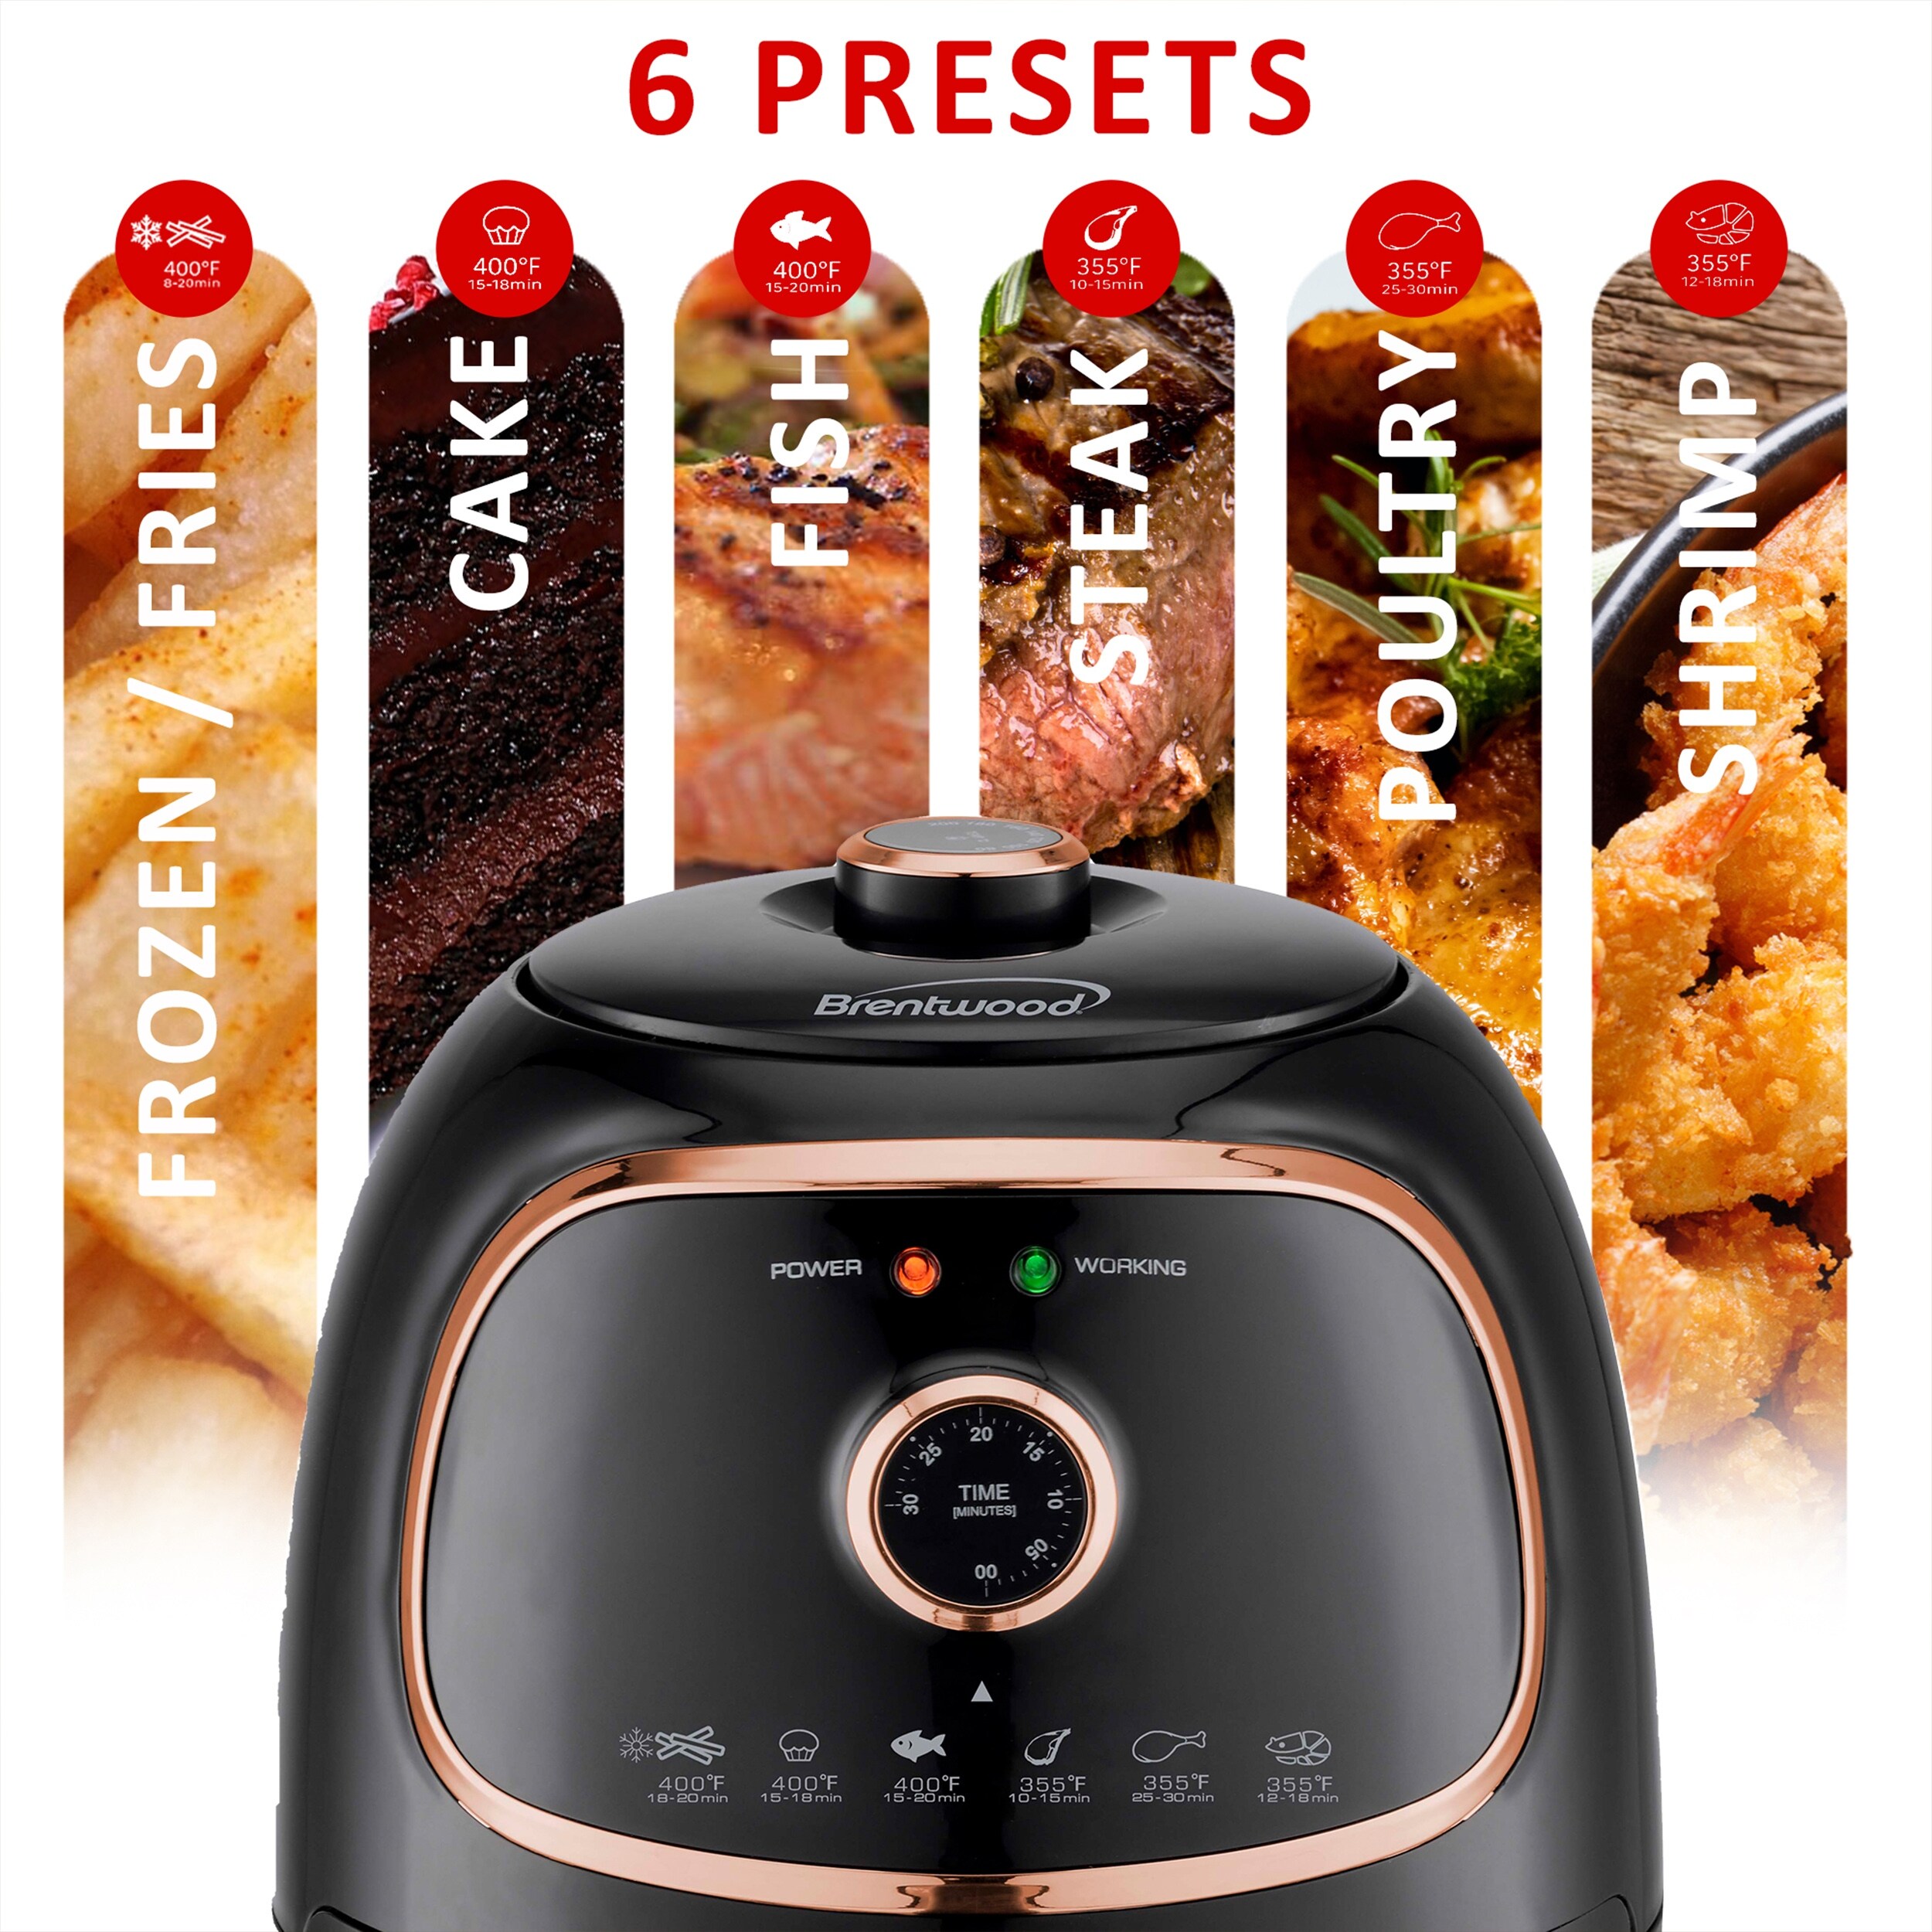 https://ak1.ostkcdn.com/images/products/is/images/direct/c9797d15cf005e3e0c6248702a7b9796dca55a5f/Brentwood-2-Quart-Small-Electric-Air-Fryer-Copper.jpg